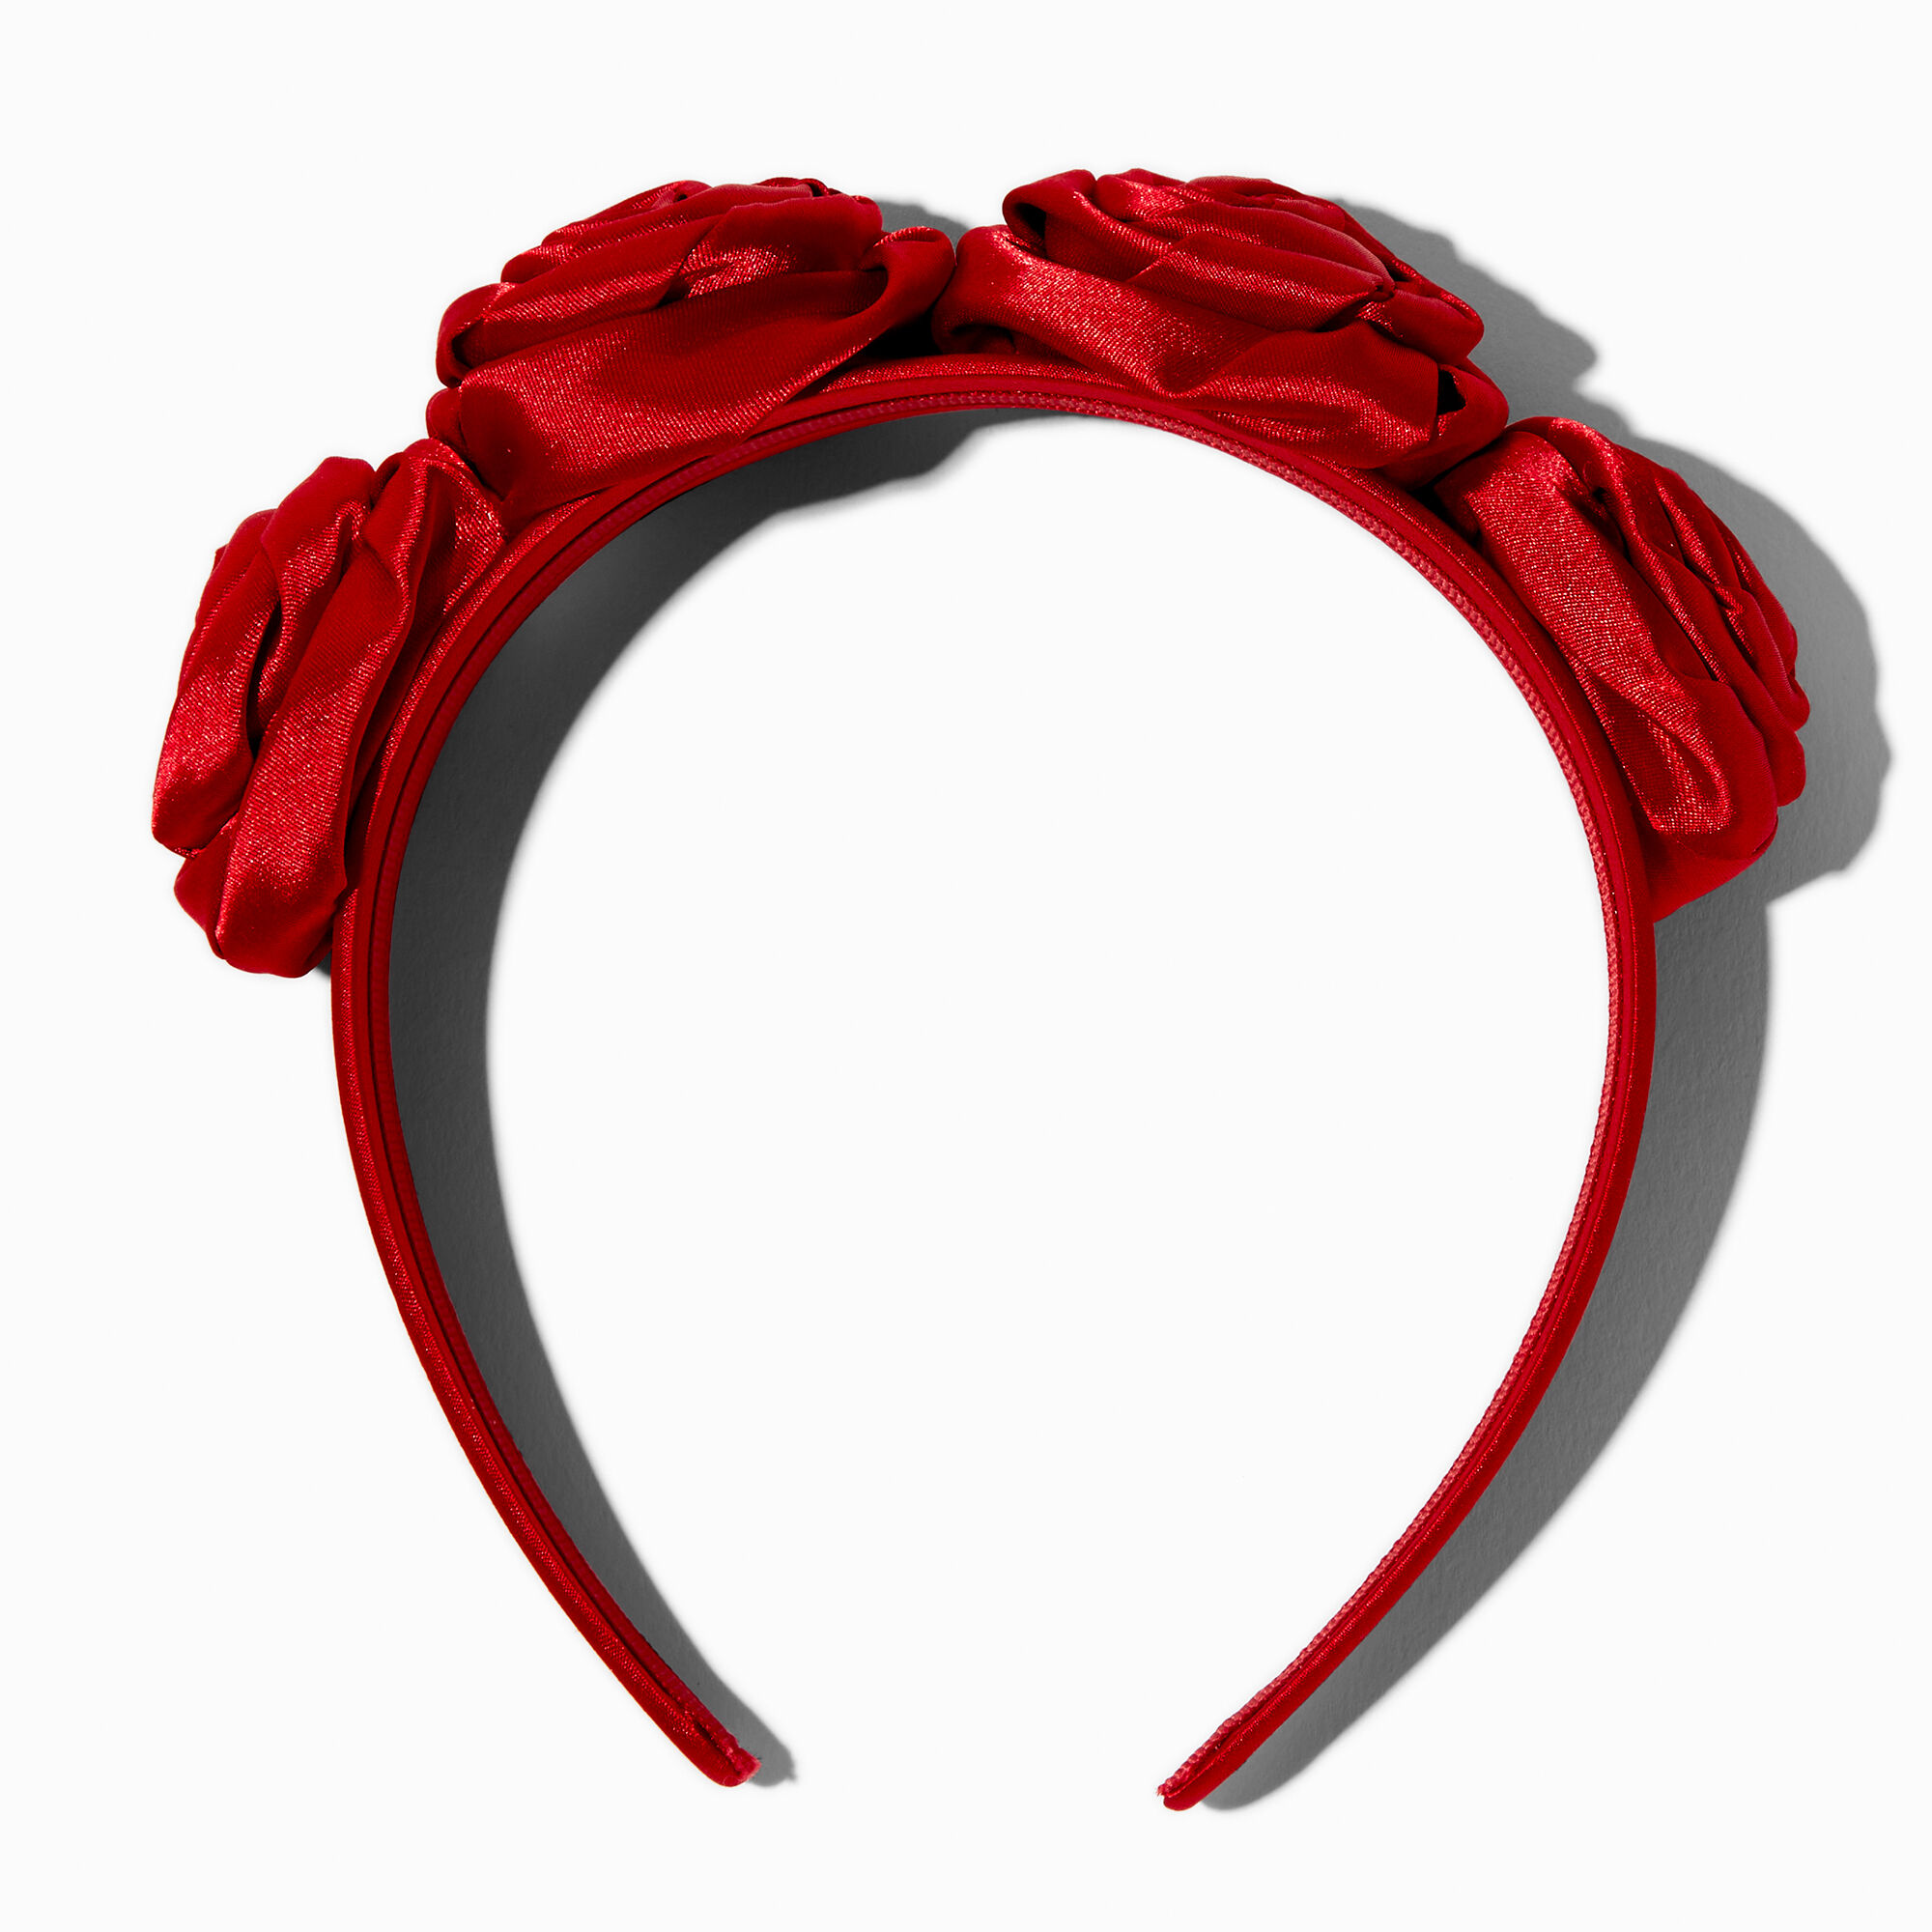 View Claires Roses Floral Headband Red information